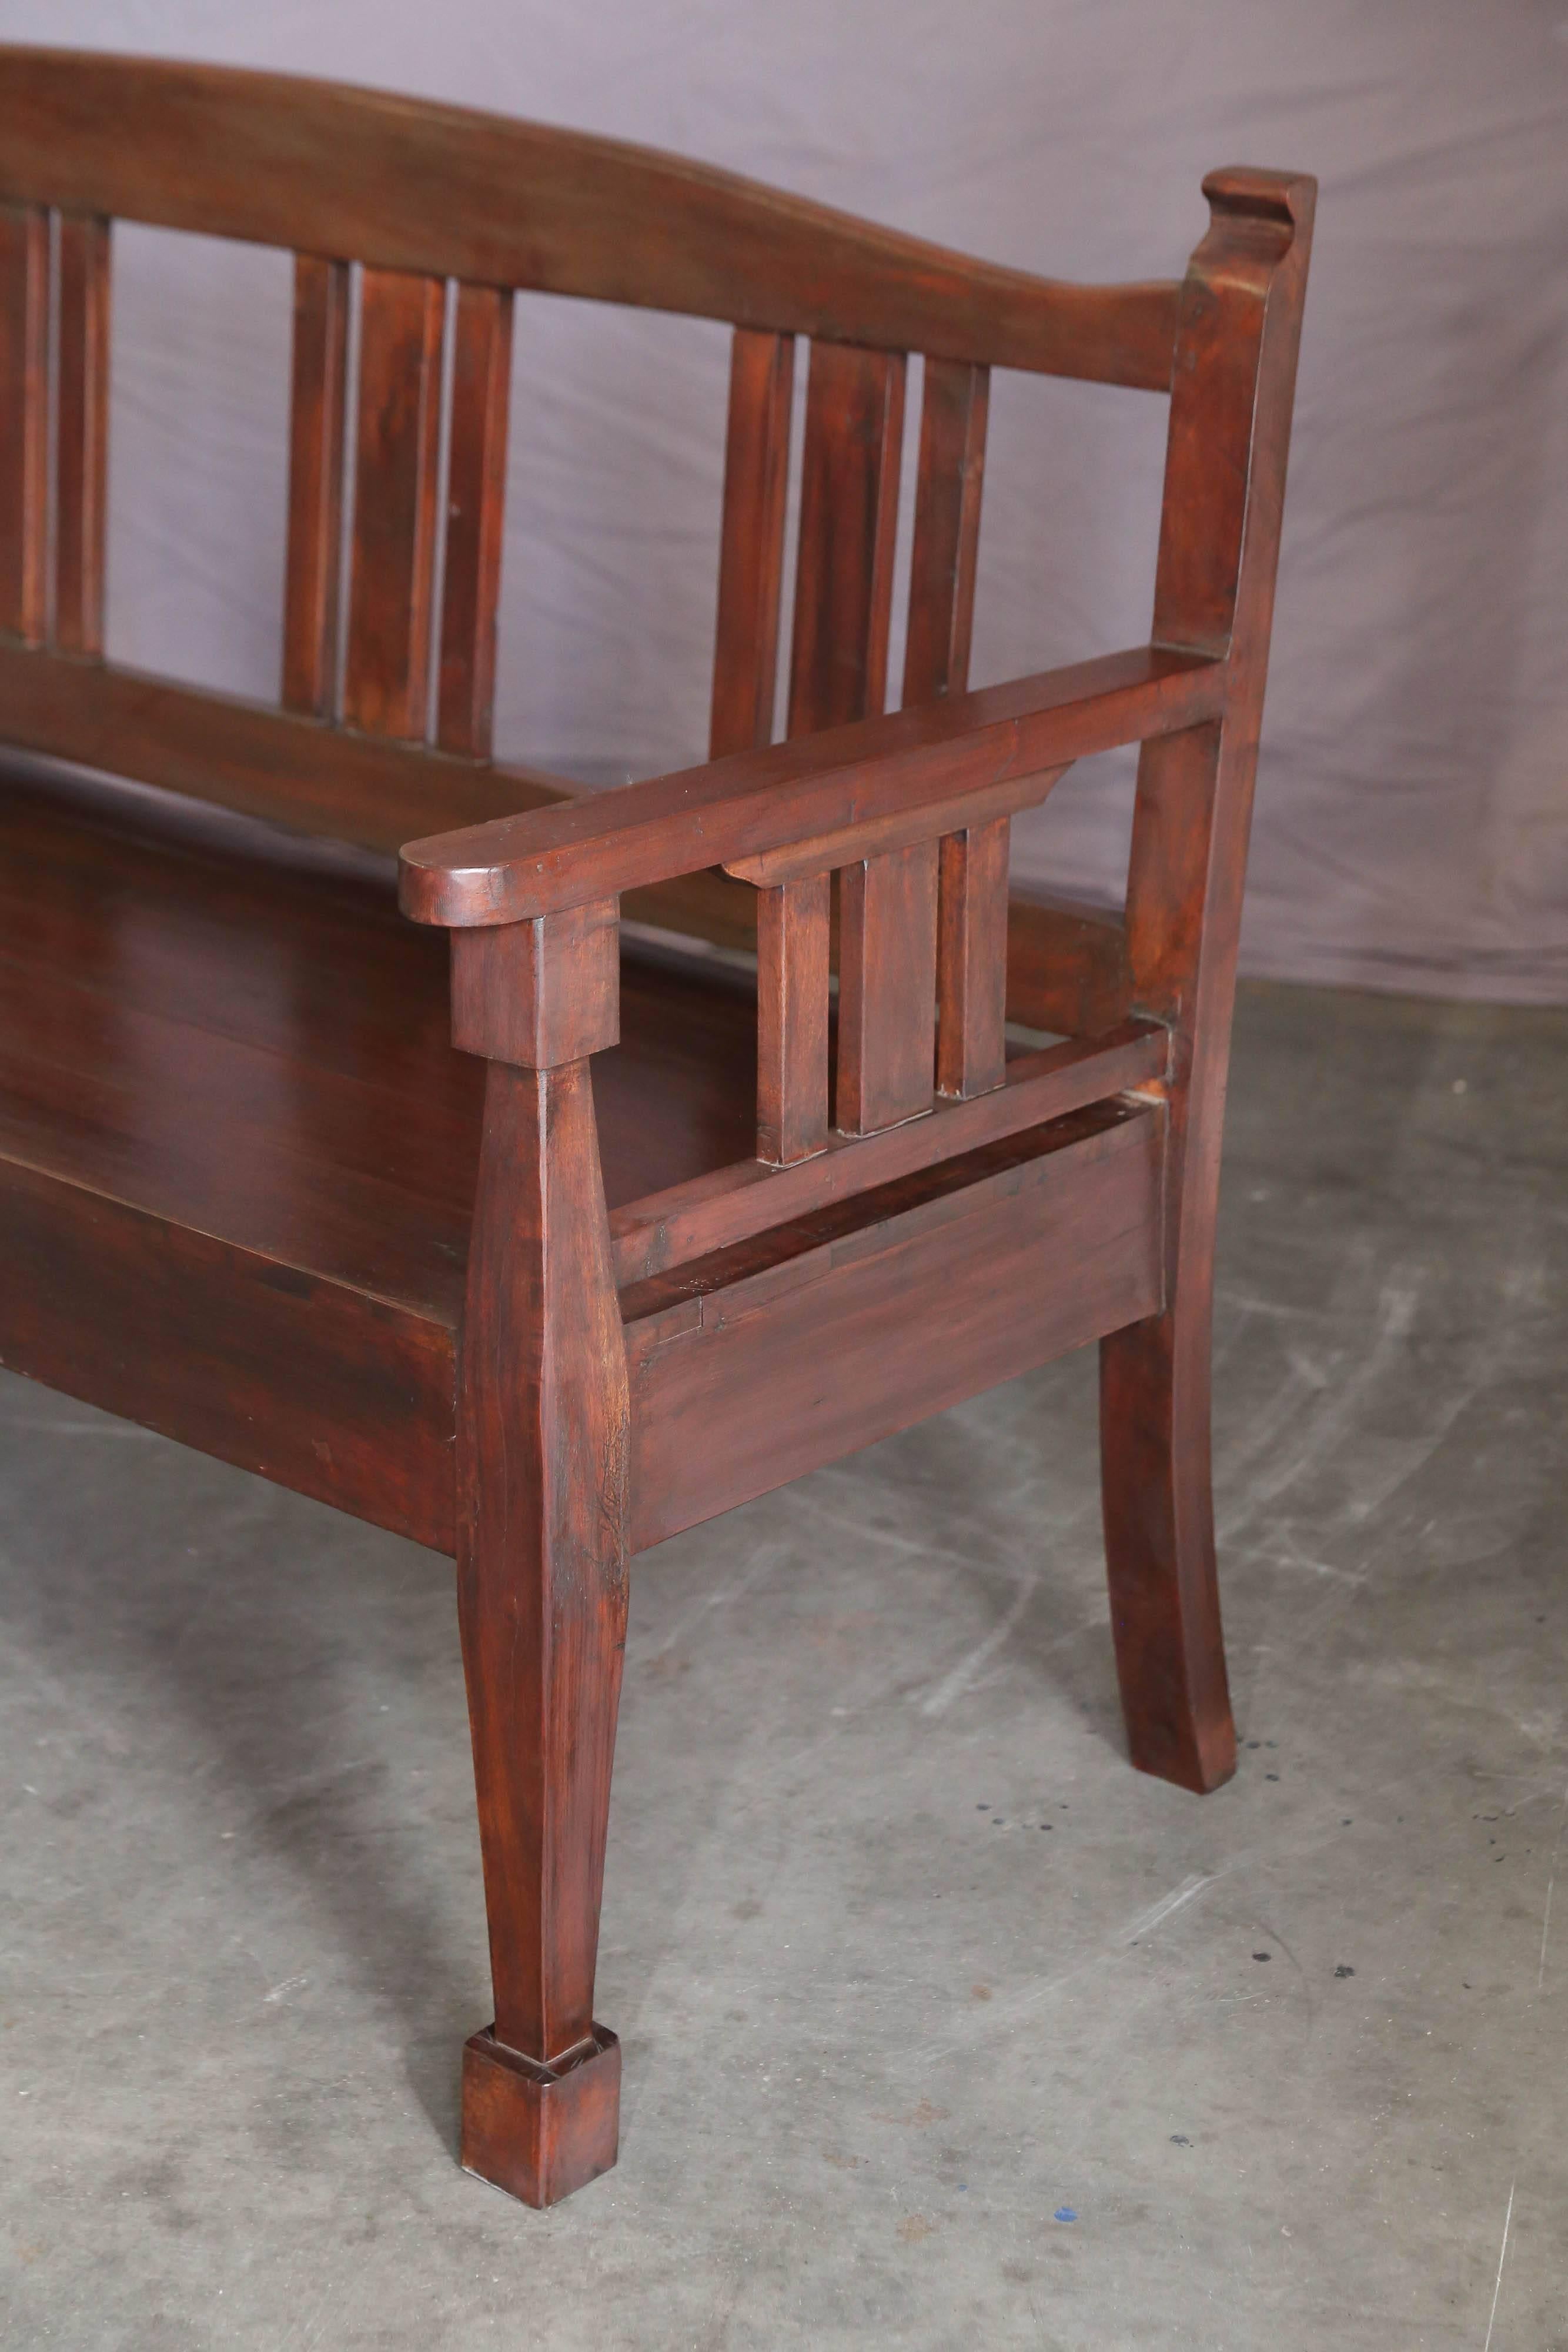 Made on commission for the owners of tea plantation situated on the hill station Darjeeling. Heavily built with no regard to cost. Supported on four sturdy legs, back and arm rests . Old world carpentry. Rich teak wood patina. Used in any style